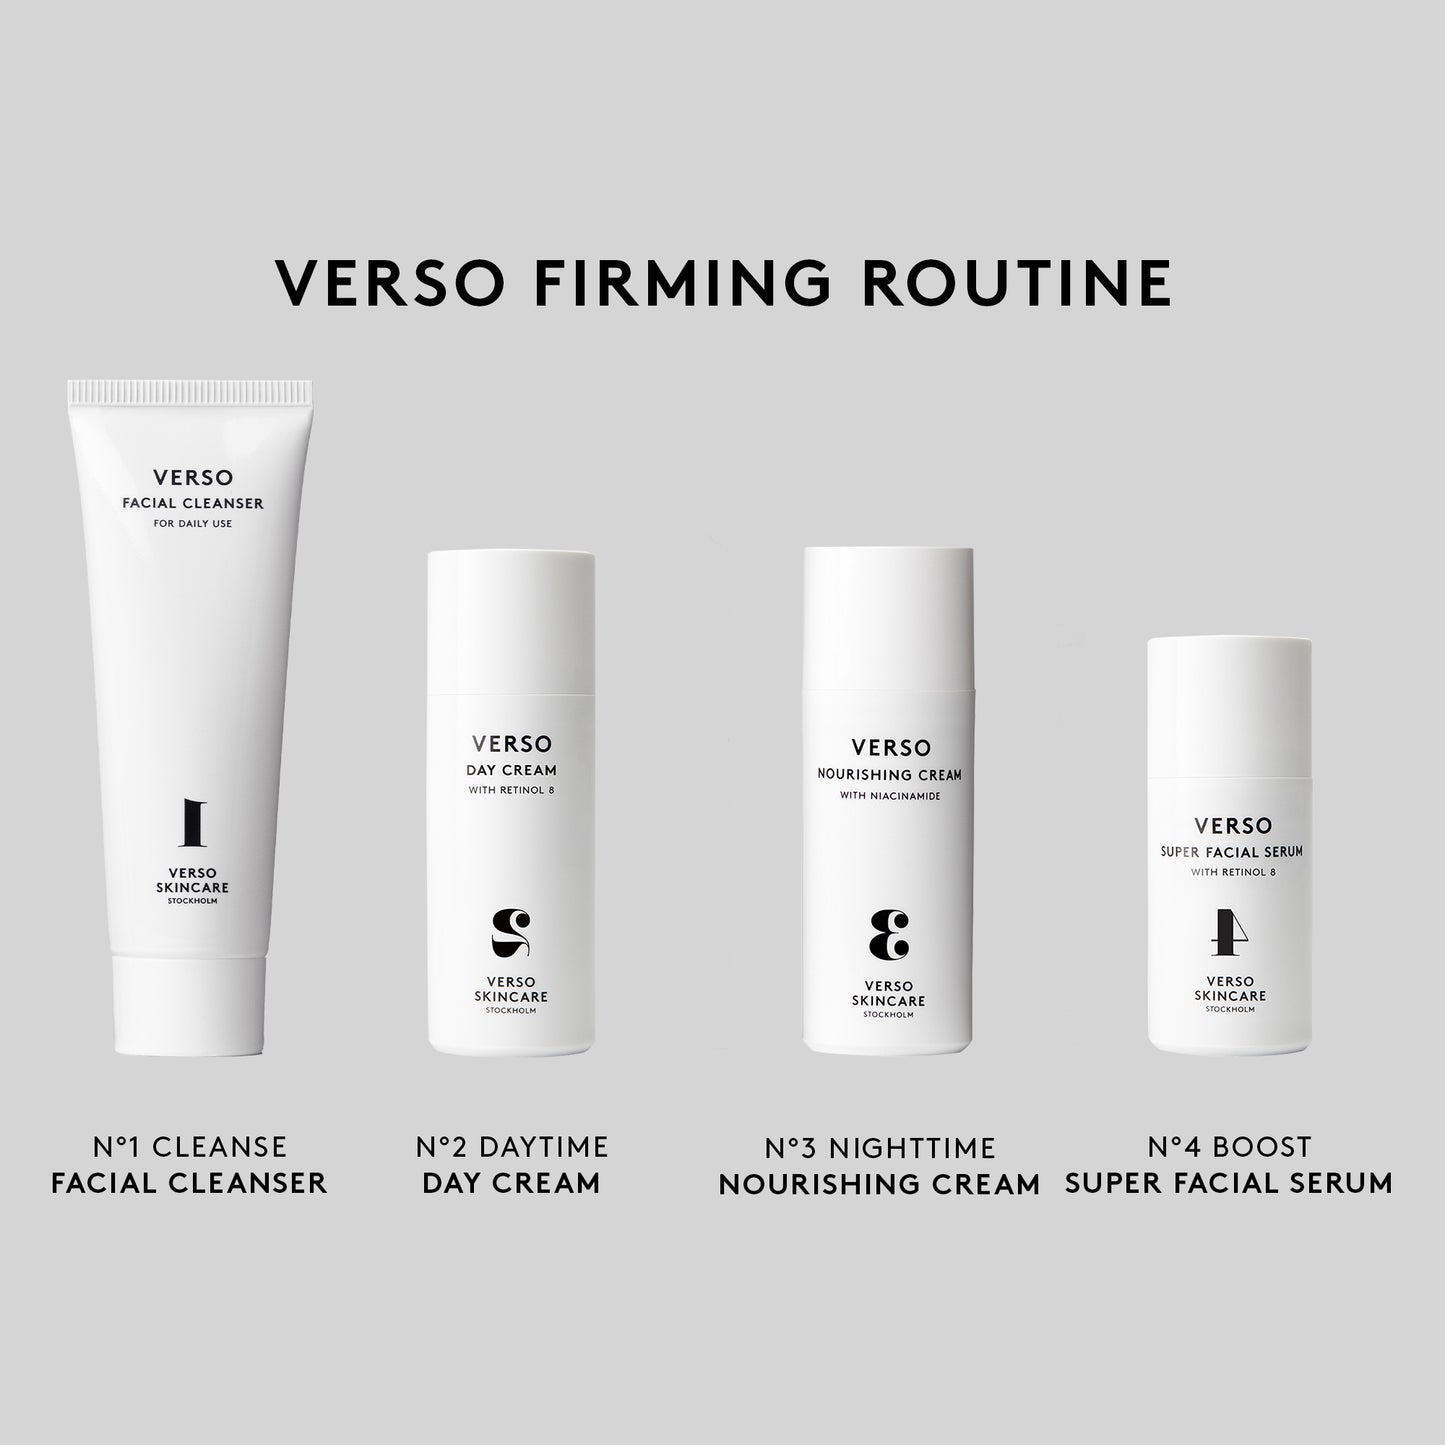 Verso Super Facial Serum: Verso Super Facial Serum is a rich, creamy serum that visibly strengthens and restores the skin. Containing a higher dose of Retinol 8, this face serum effectively promotes the appearance of fresh, youthful skin while visibly improving the skin's texture. The result includes a reduced appearance of wrinkles and discoloration.